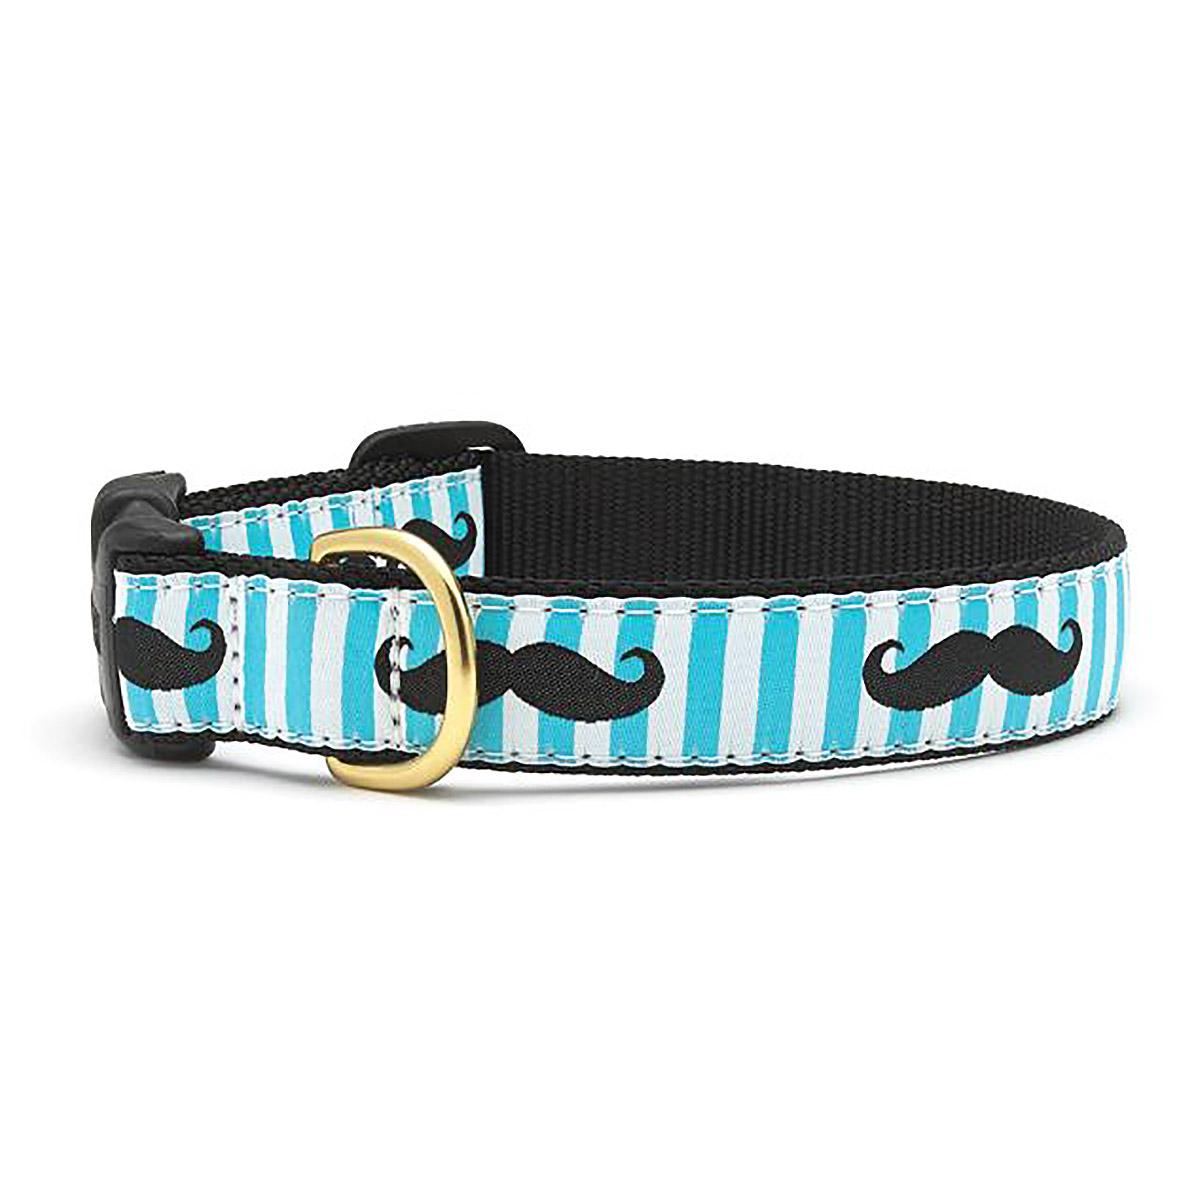 Mustache Dog Collar by Up Country